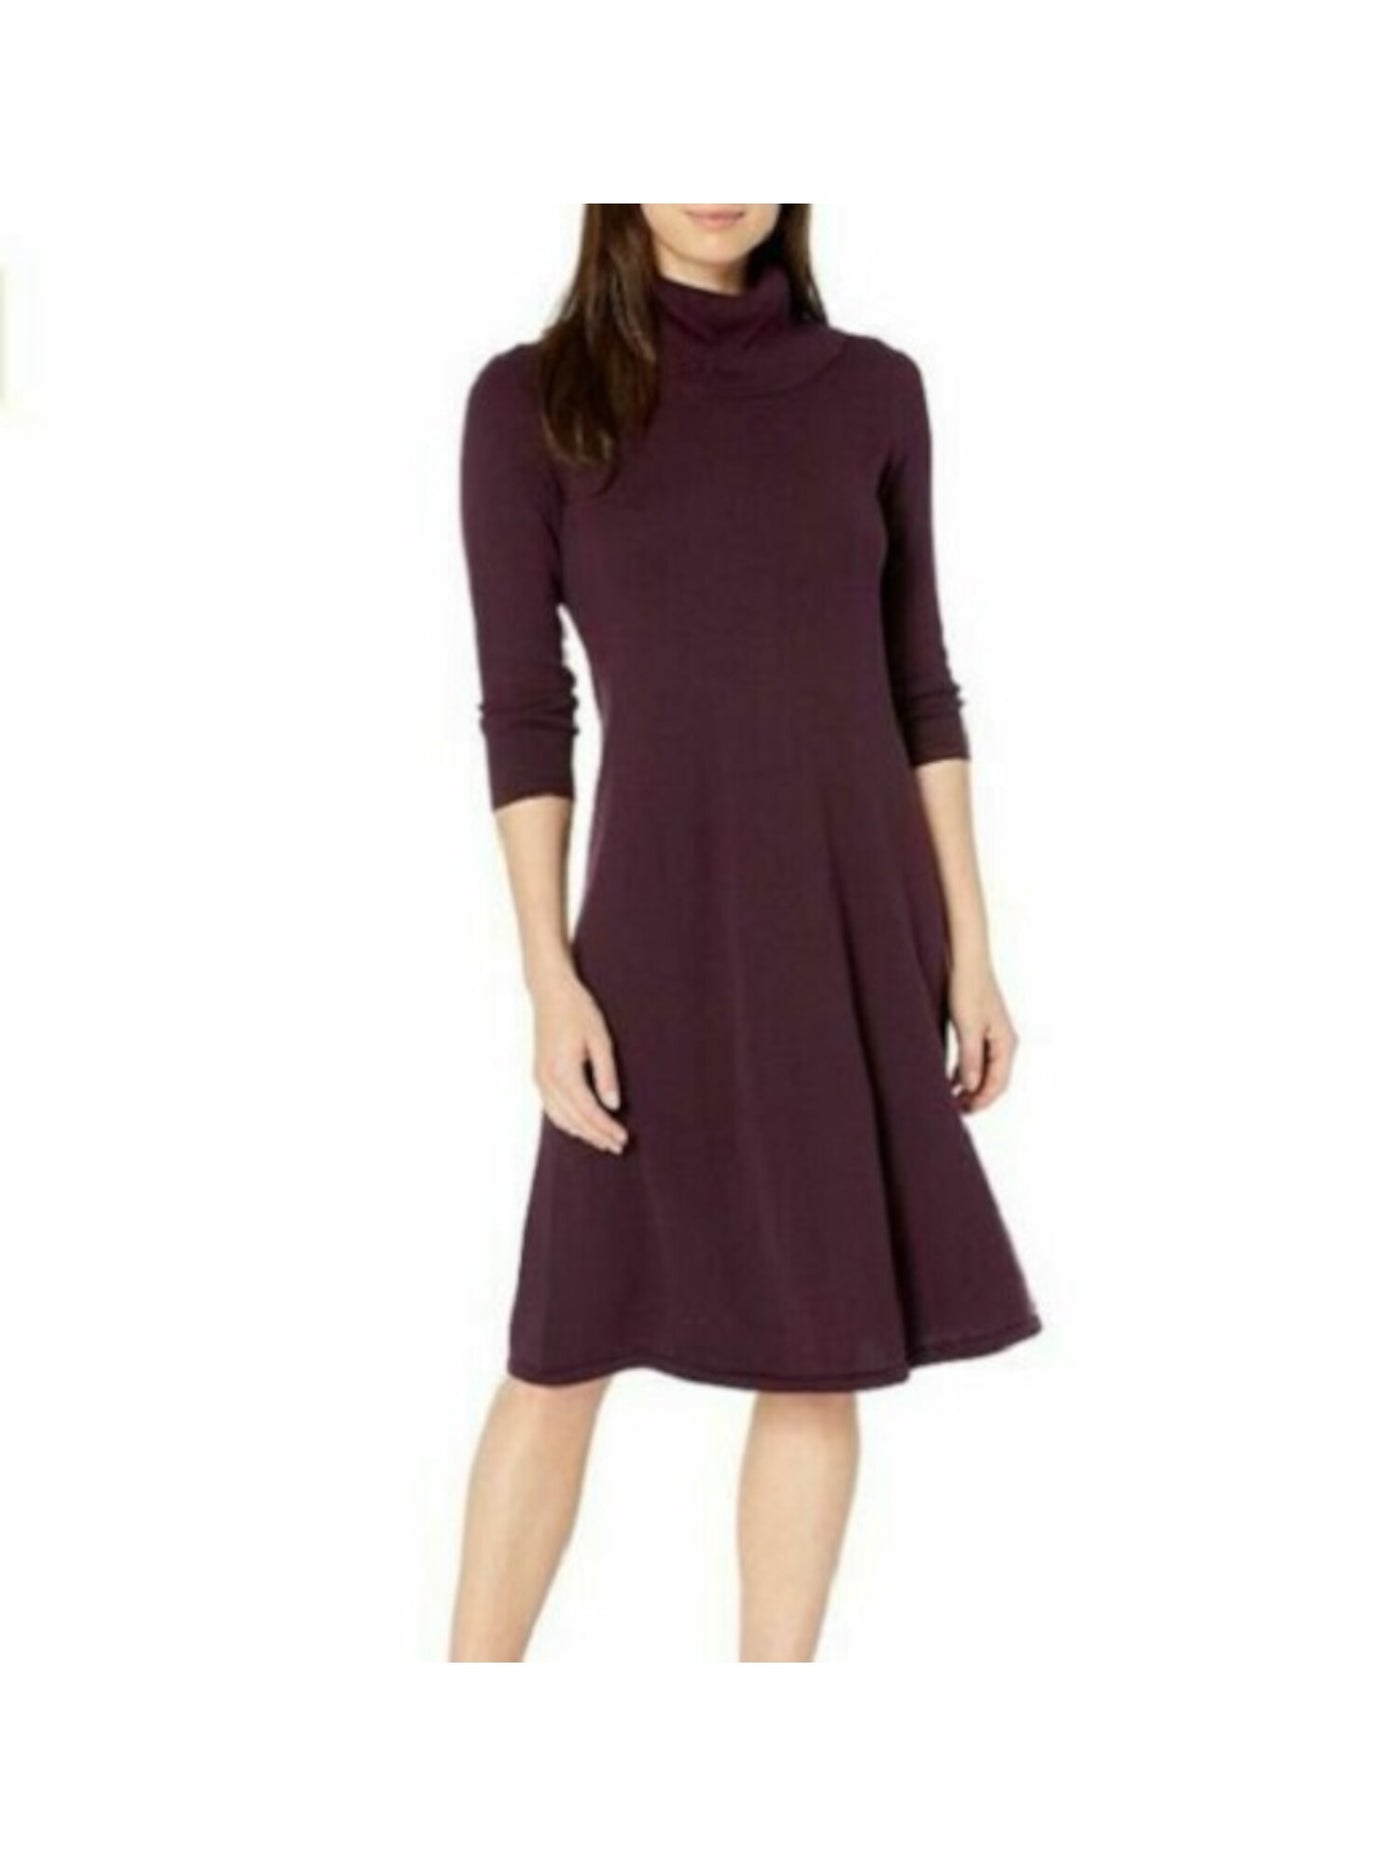 NINE WEST Womens Purple Knit Ribbed Textured 3/4 Sleeve Cowl Neck Knee Length Party Fit + Flare Dress S